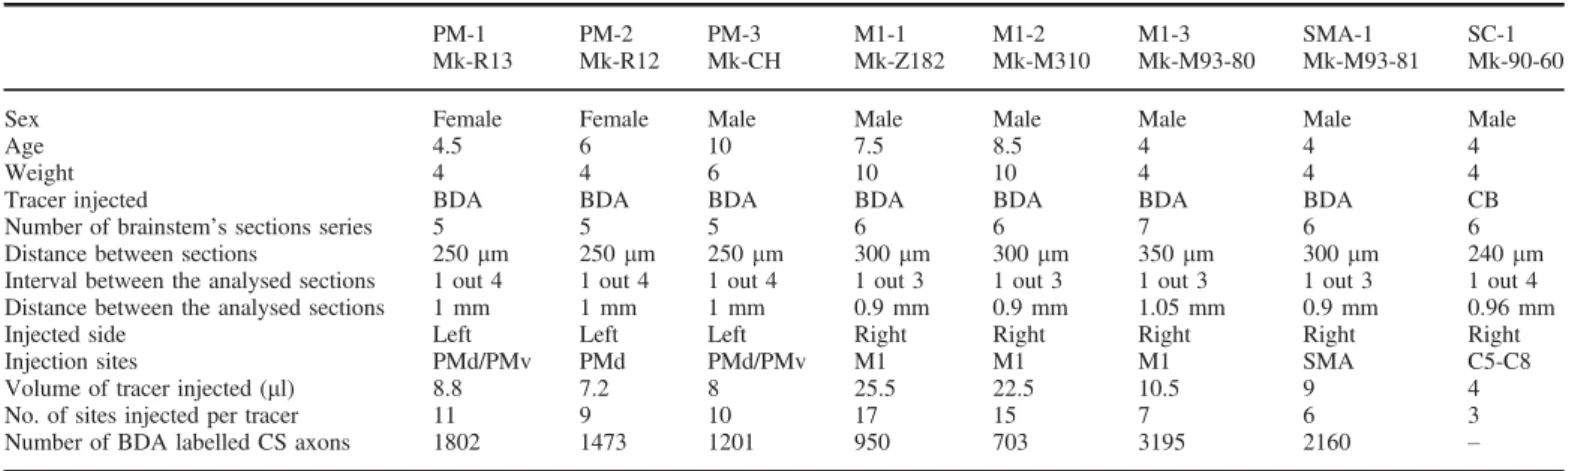 Table 1. Summary of the individual data for each of the eight monkeys involved in this study